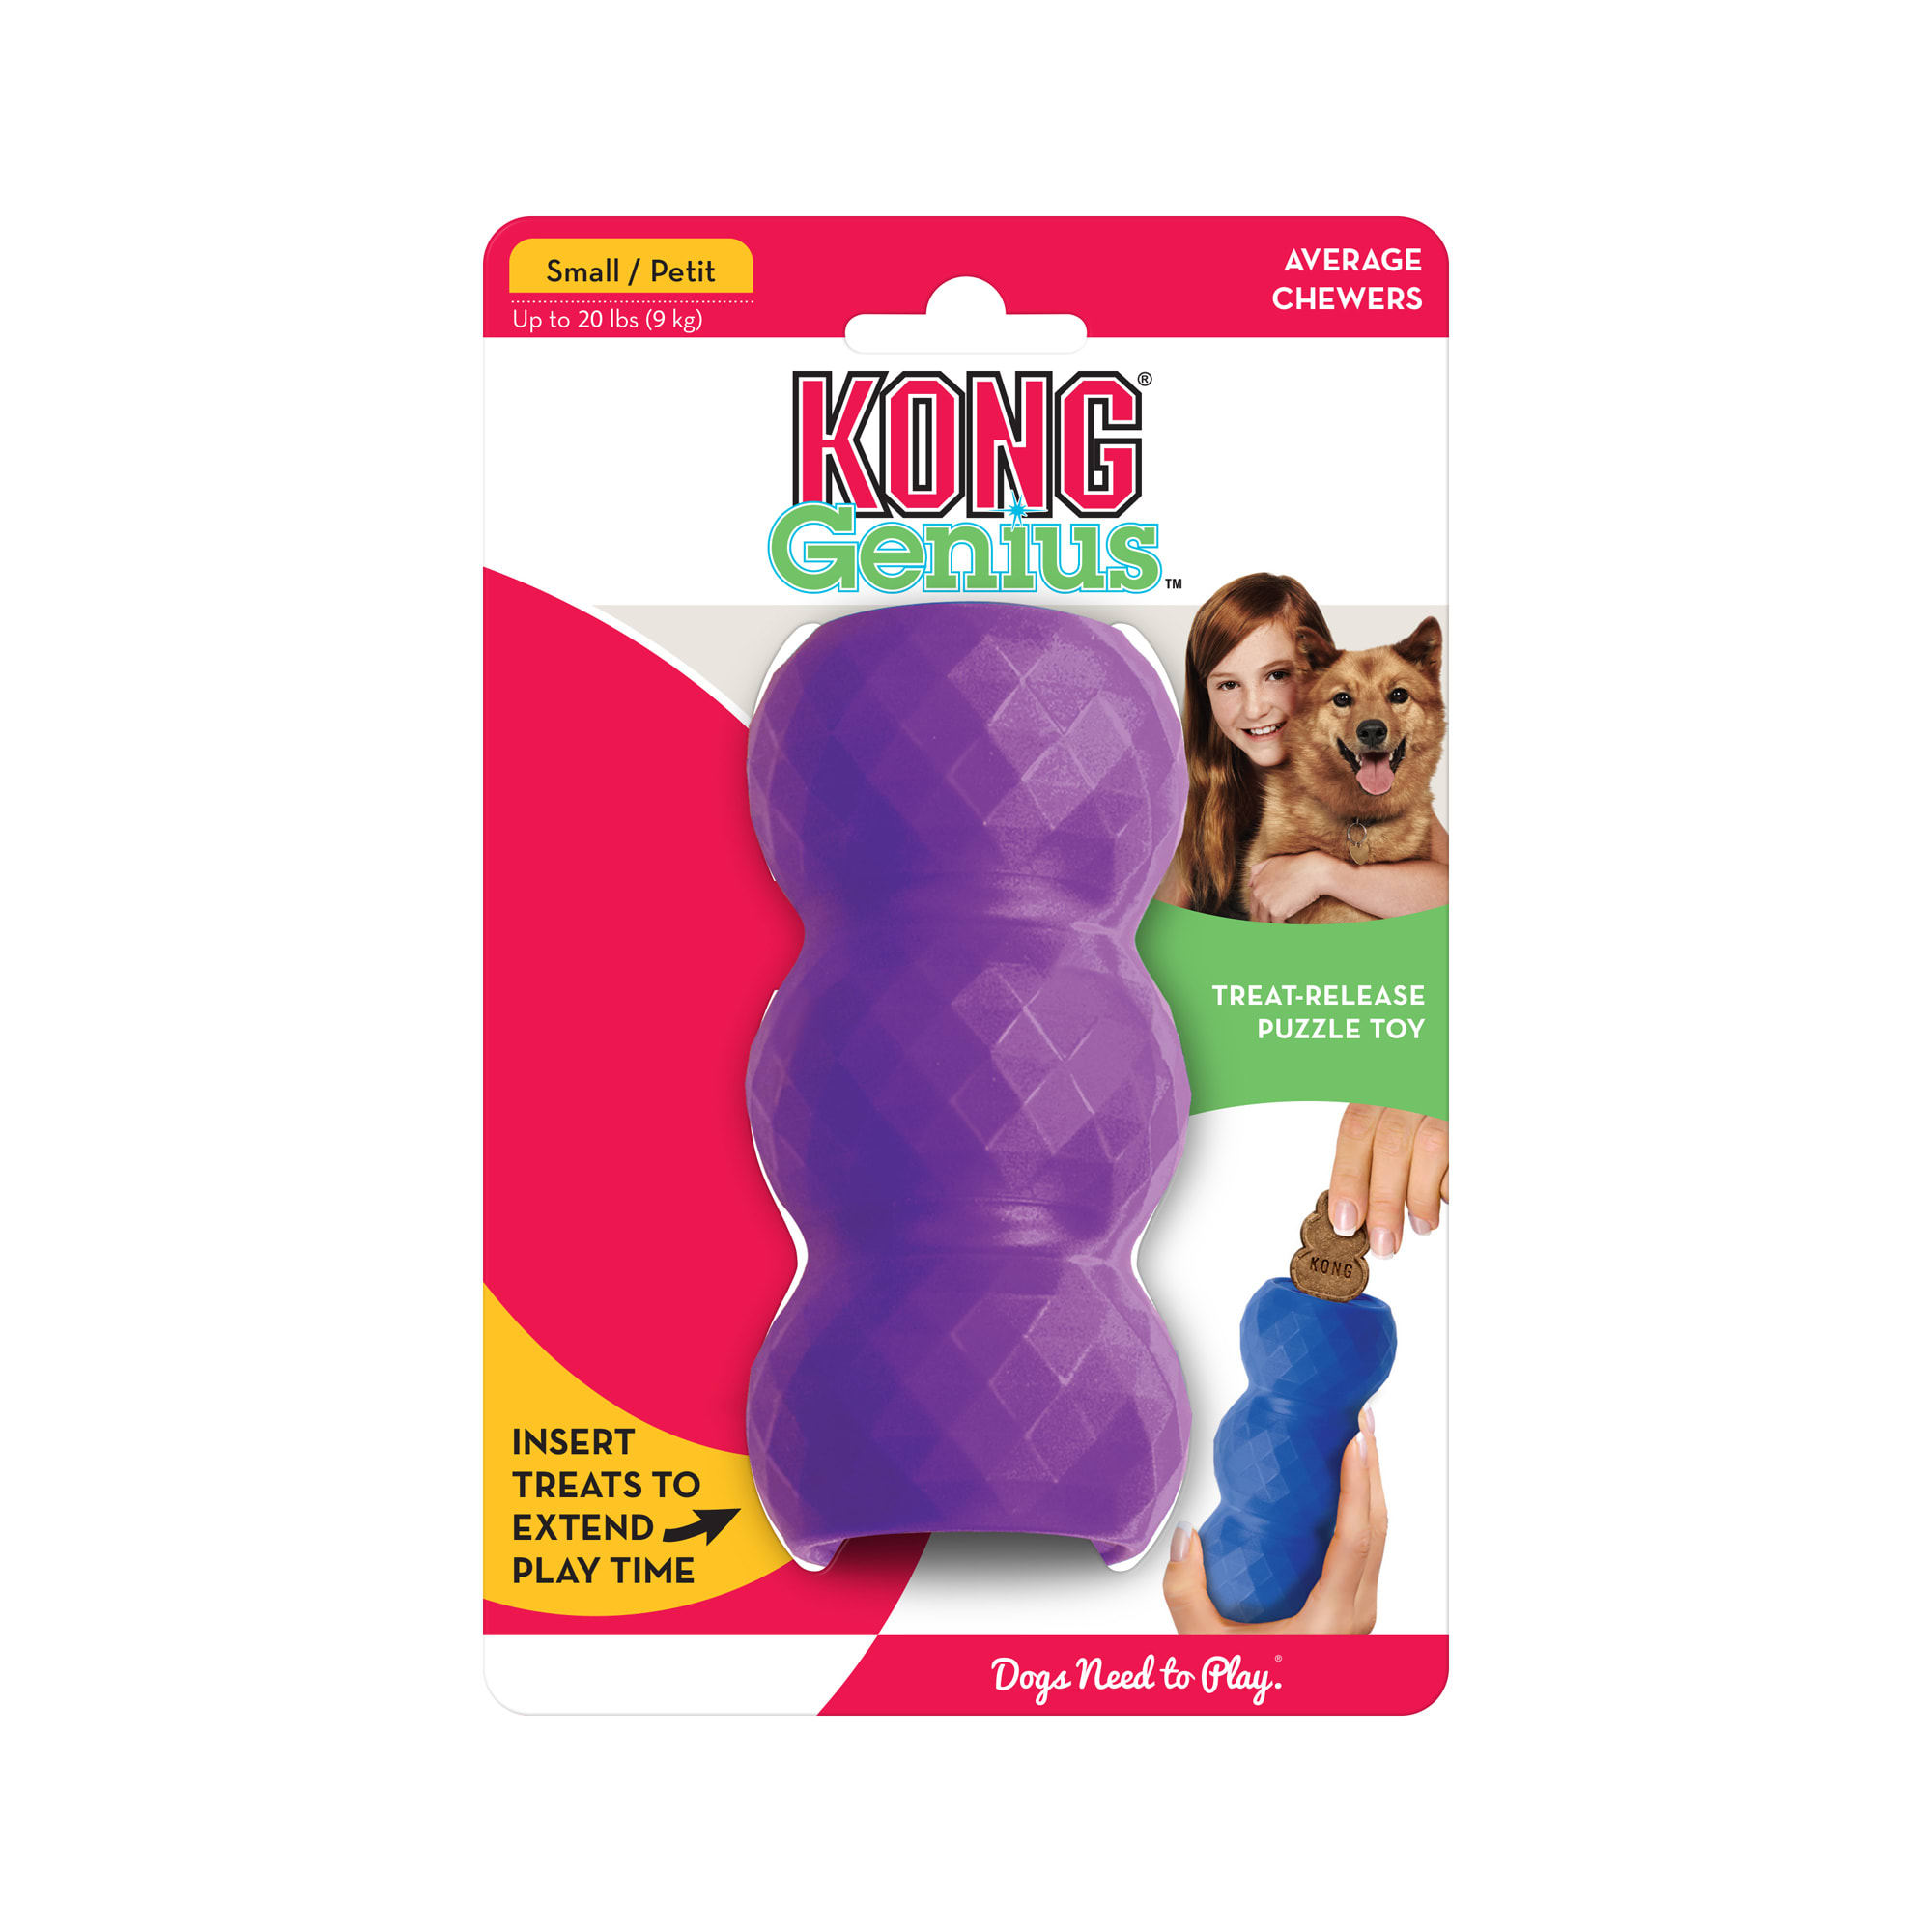 KONG Dog Toy Review: A Must-Have